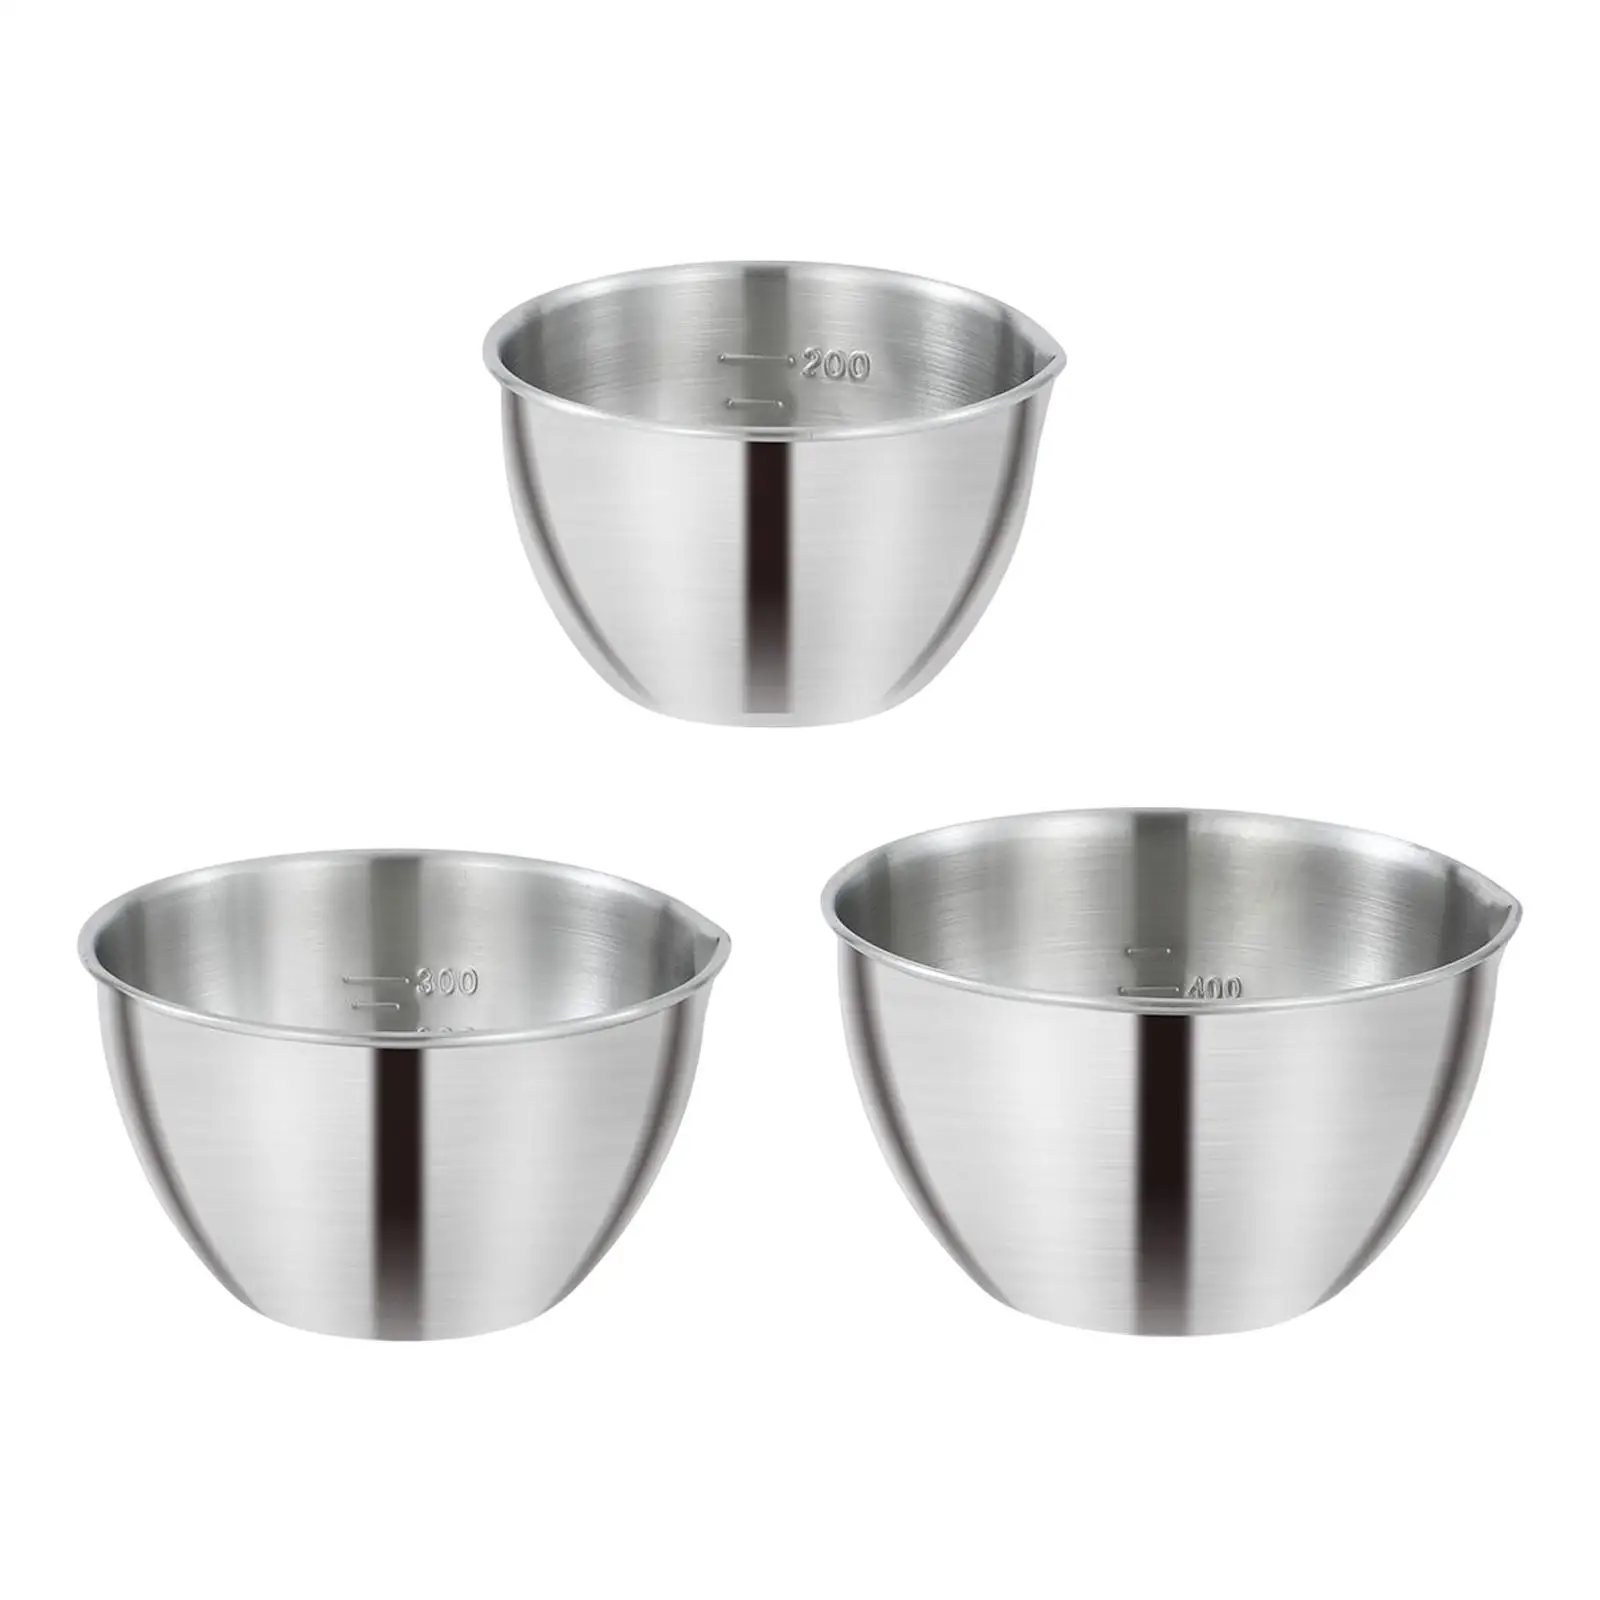 Dish Bowl Space Saving with Scale Nesting Storage Bowls for kitchen